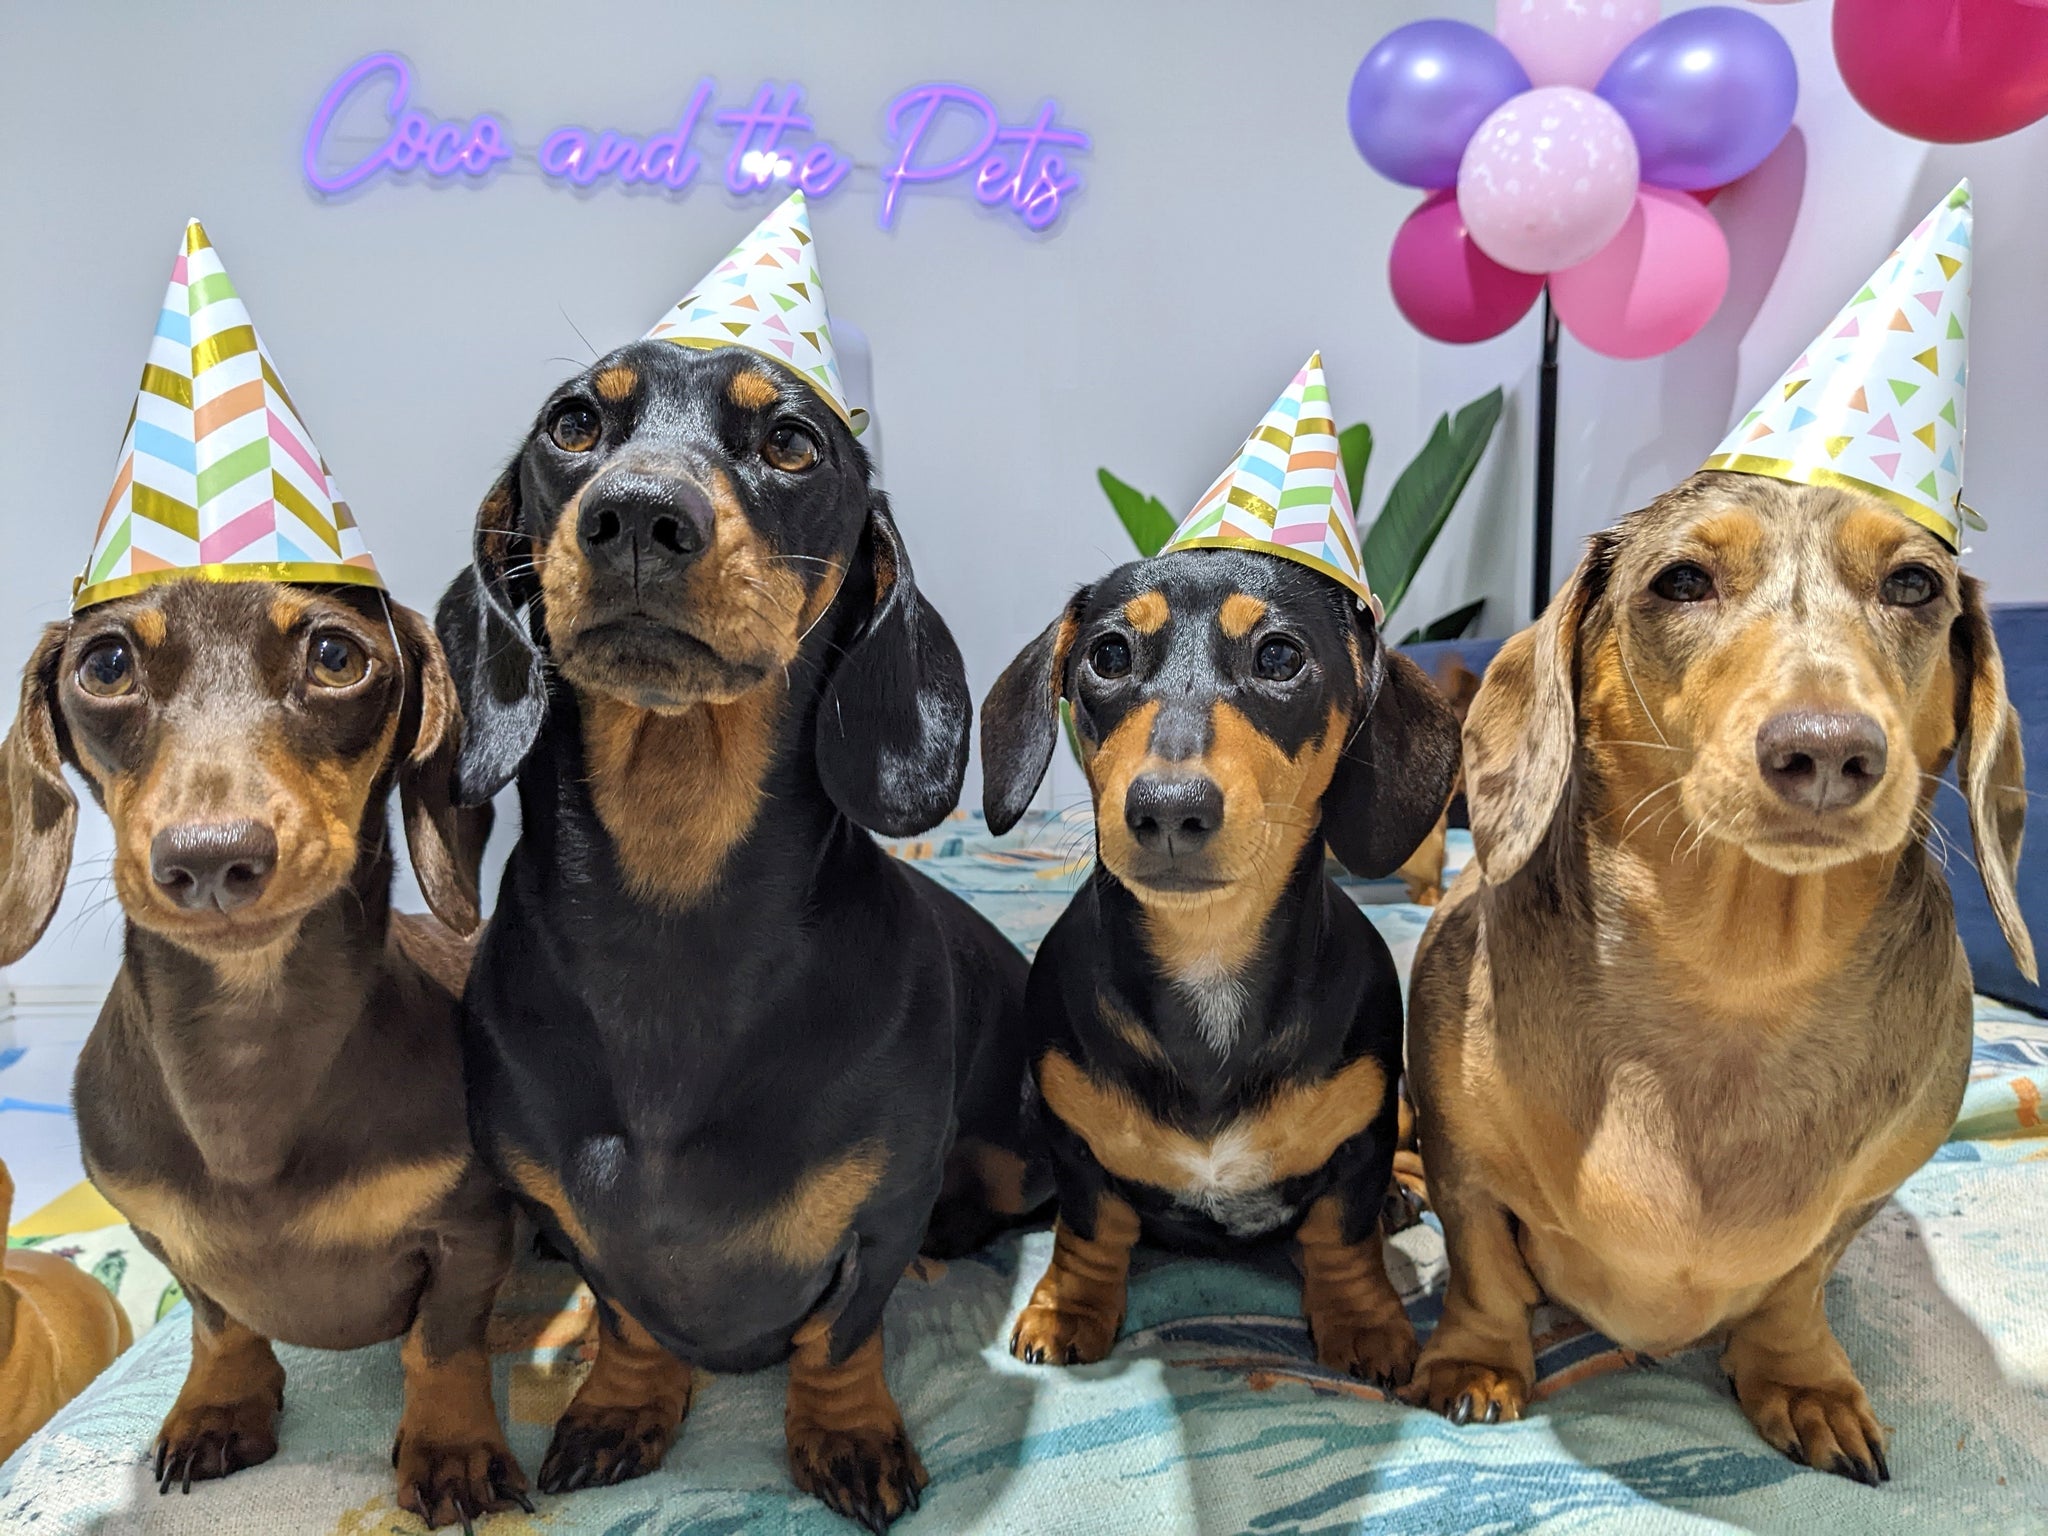 Dog day care, dog overnight boarding and dog birthday parties in Sydney